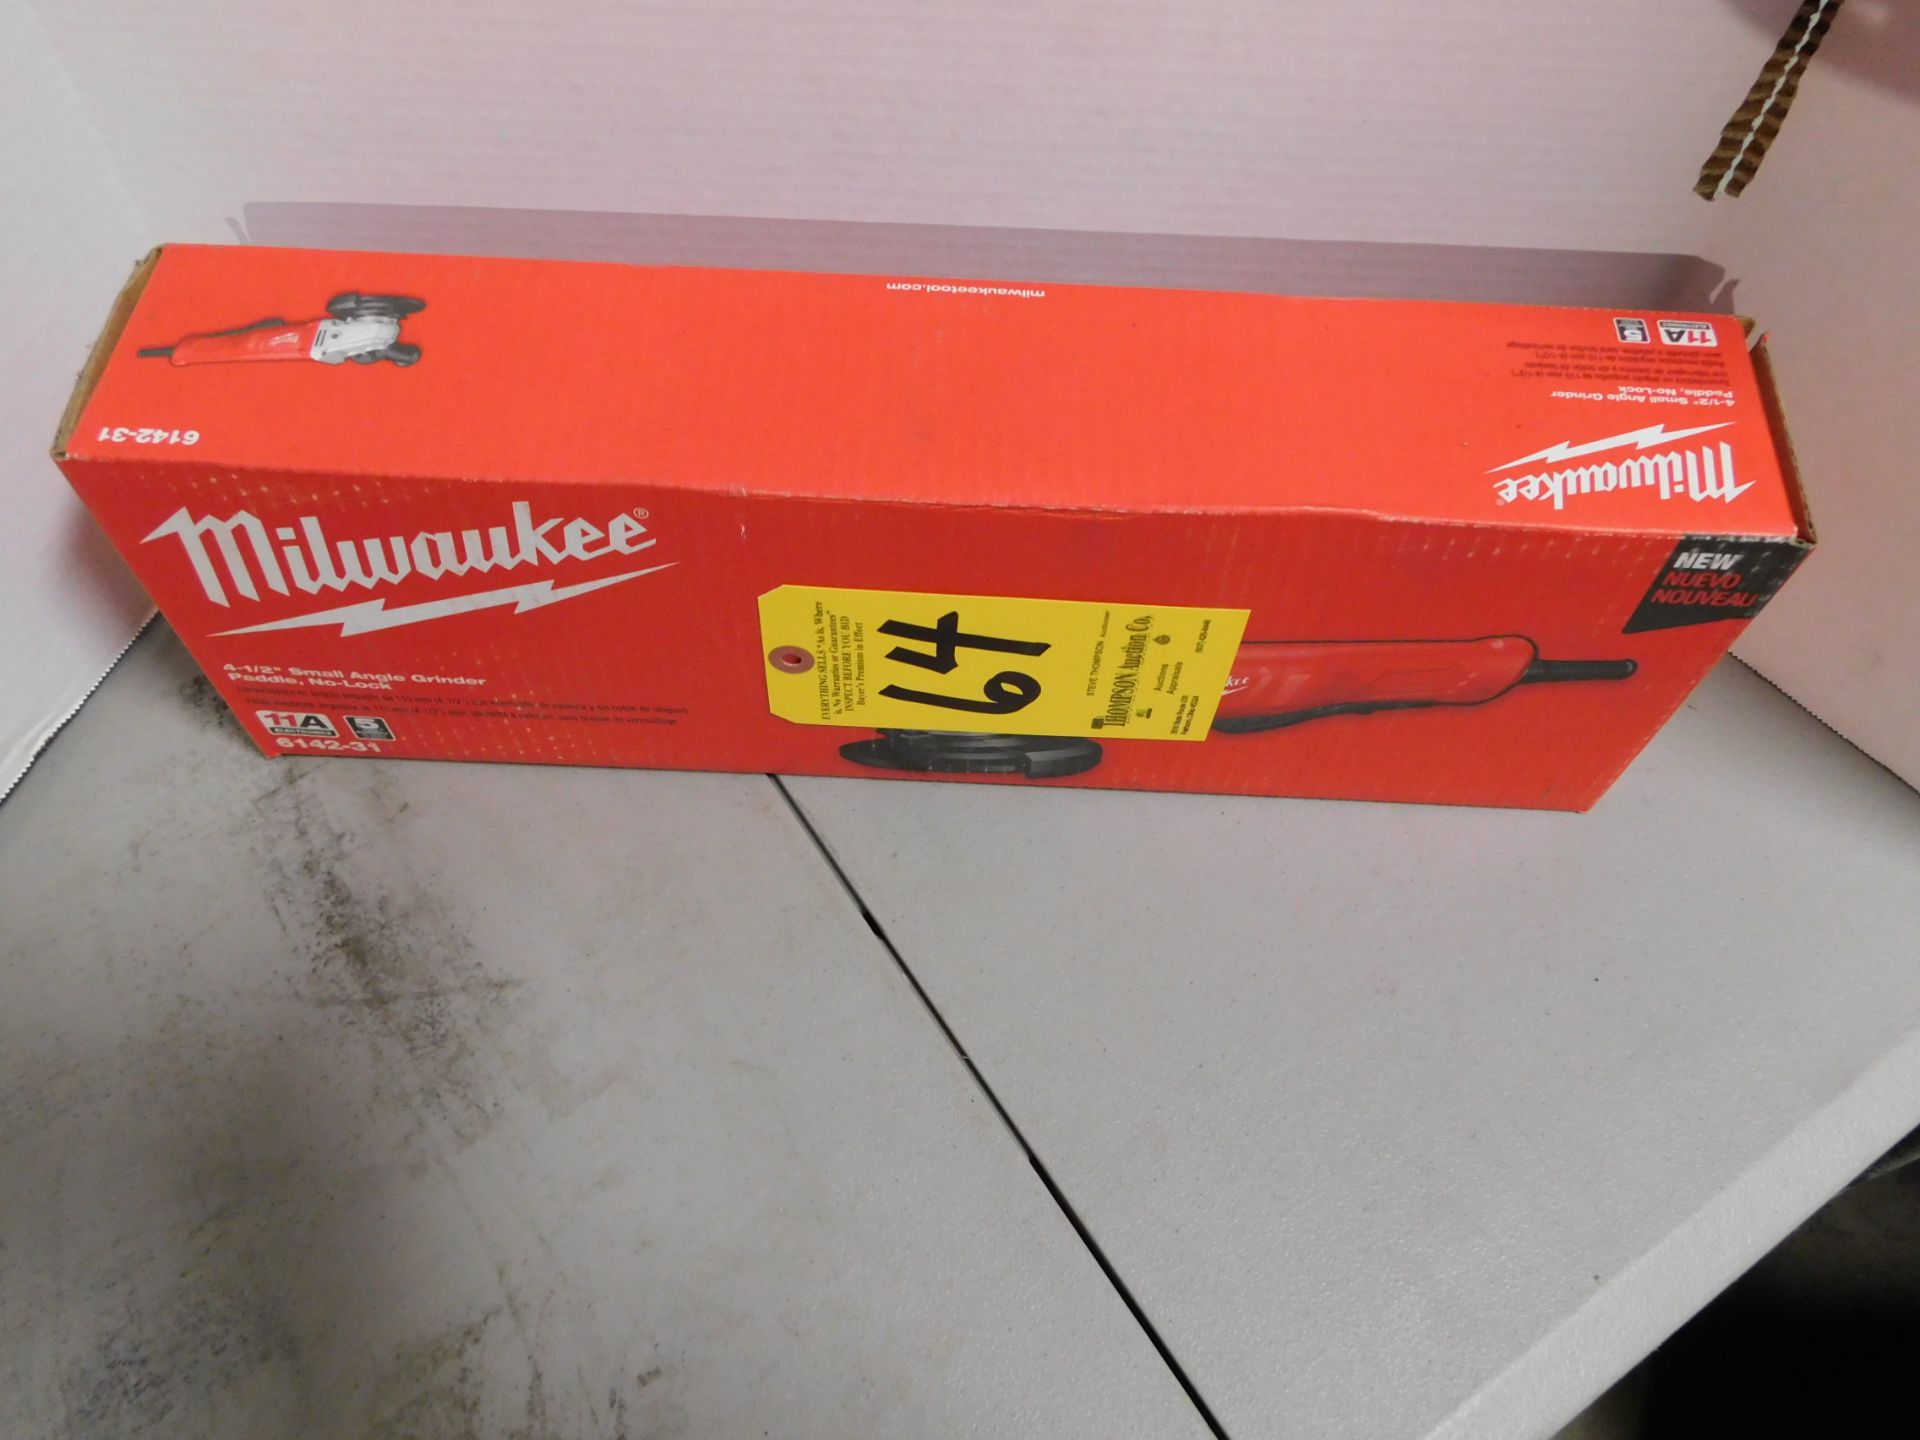 New Milwaukee 6142-31, 4 1/2" Right Angle Grinder